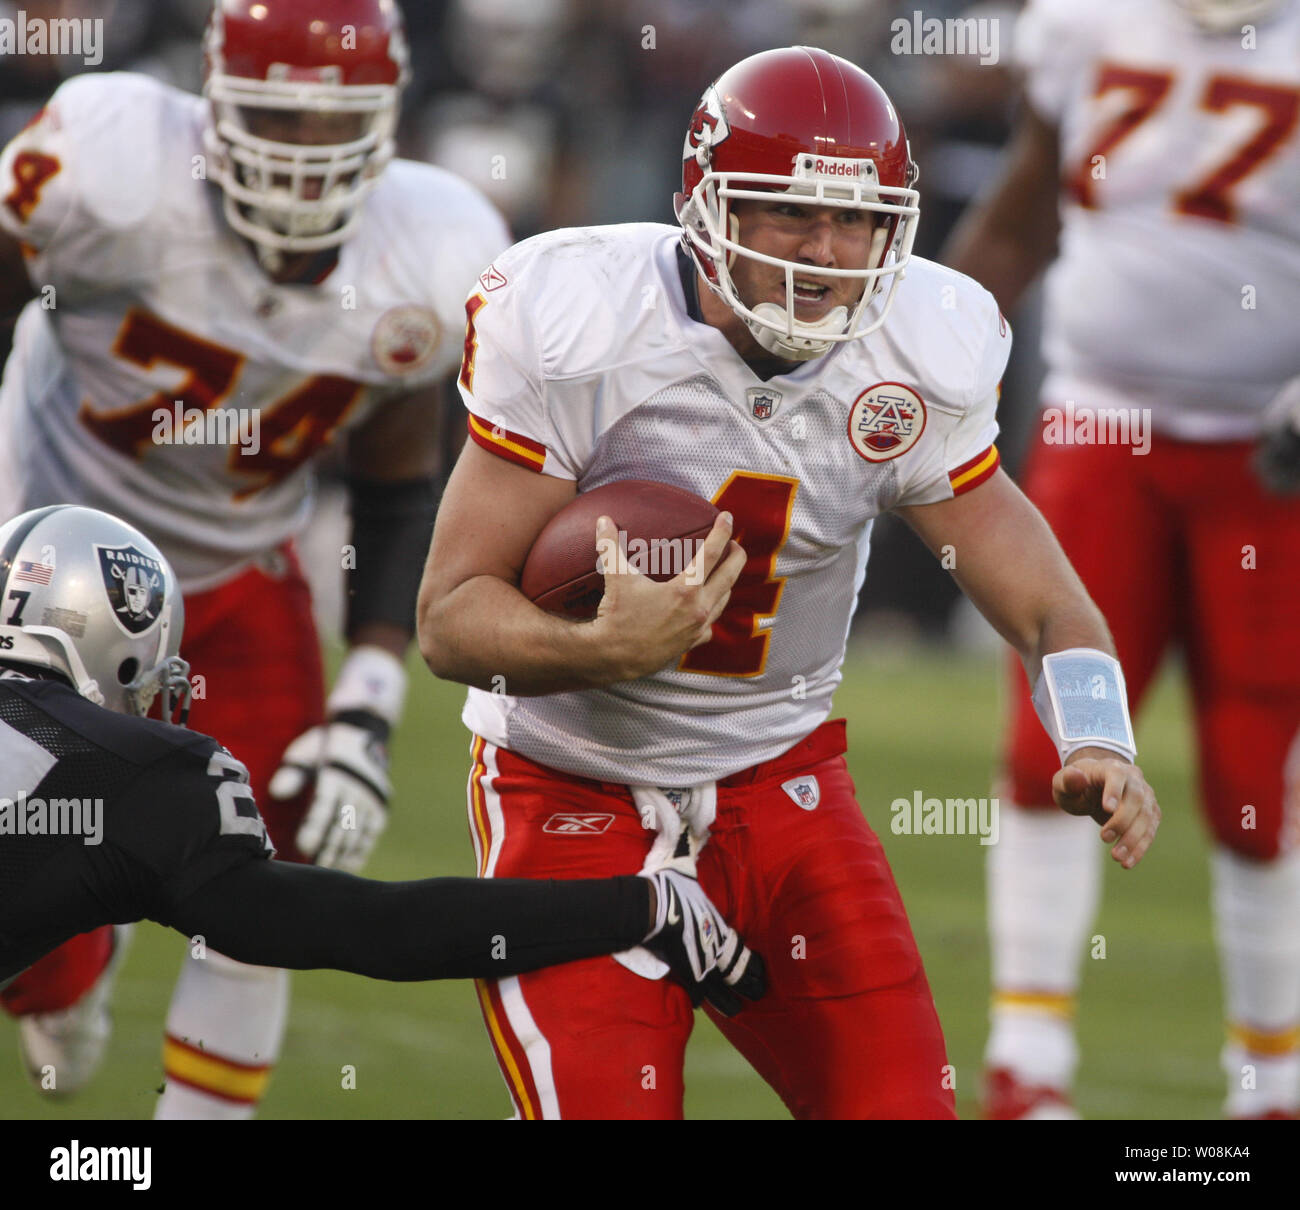 Kansas City Chiefs QB Tyler Thigpen races up the middle against the  Oakland Raiders on a quarterback draw in the third quarter at the Oakland Coliseum in Oakland, California on November 30, 2008. The Chiefs defeated the Raiders 20-13.   (UPI Photo/Terry Schmitt) Stock Photo